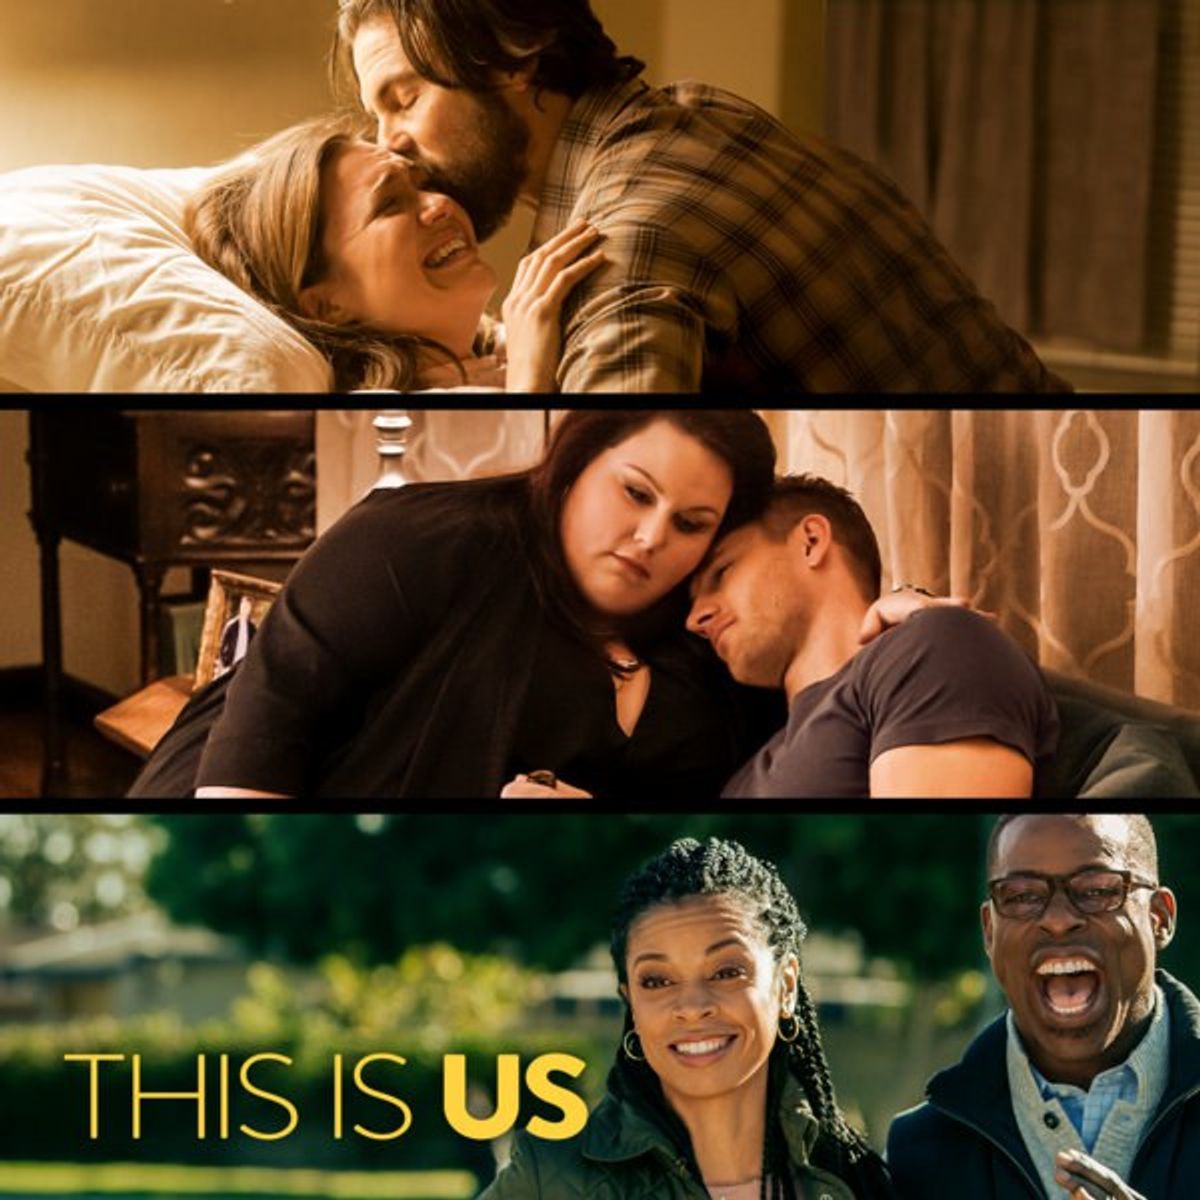 This is us (the tv show)... So Far